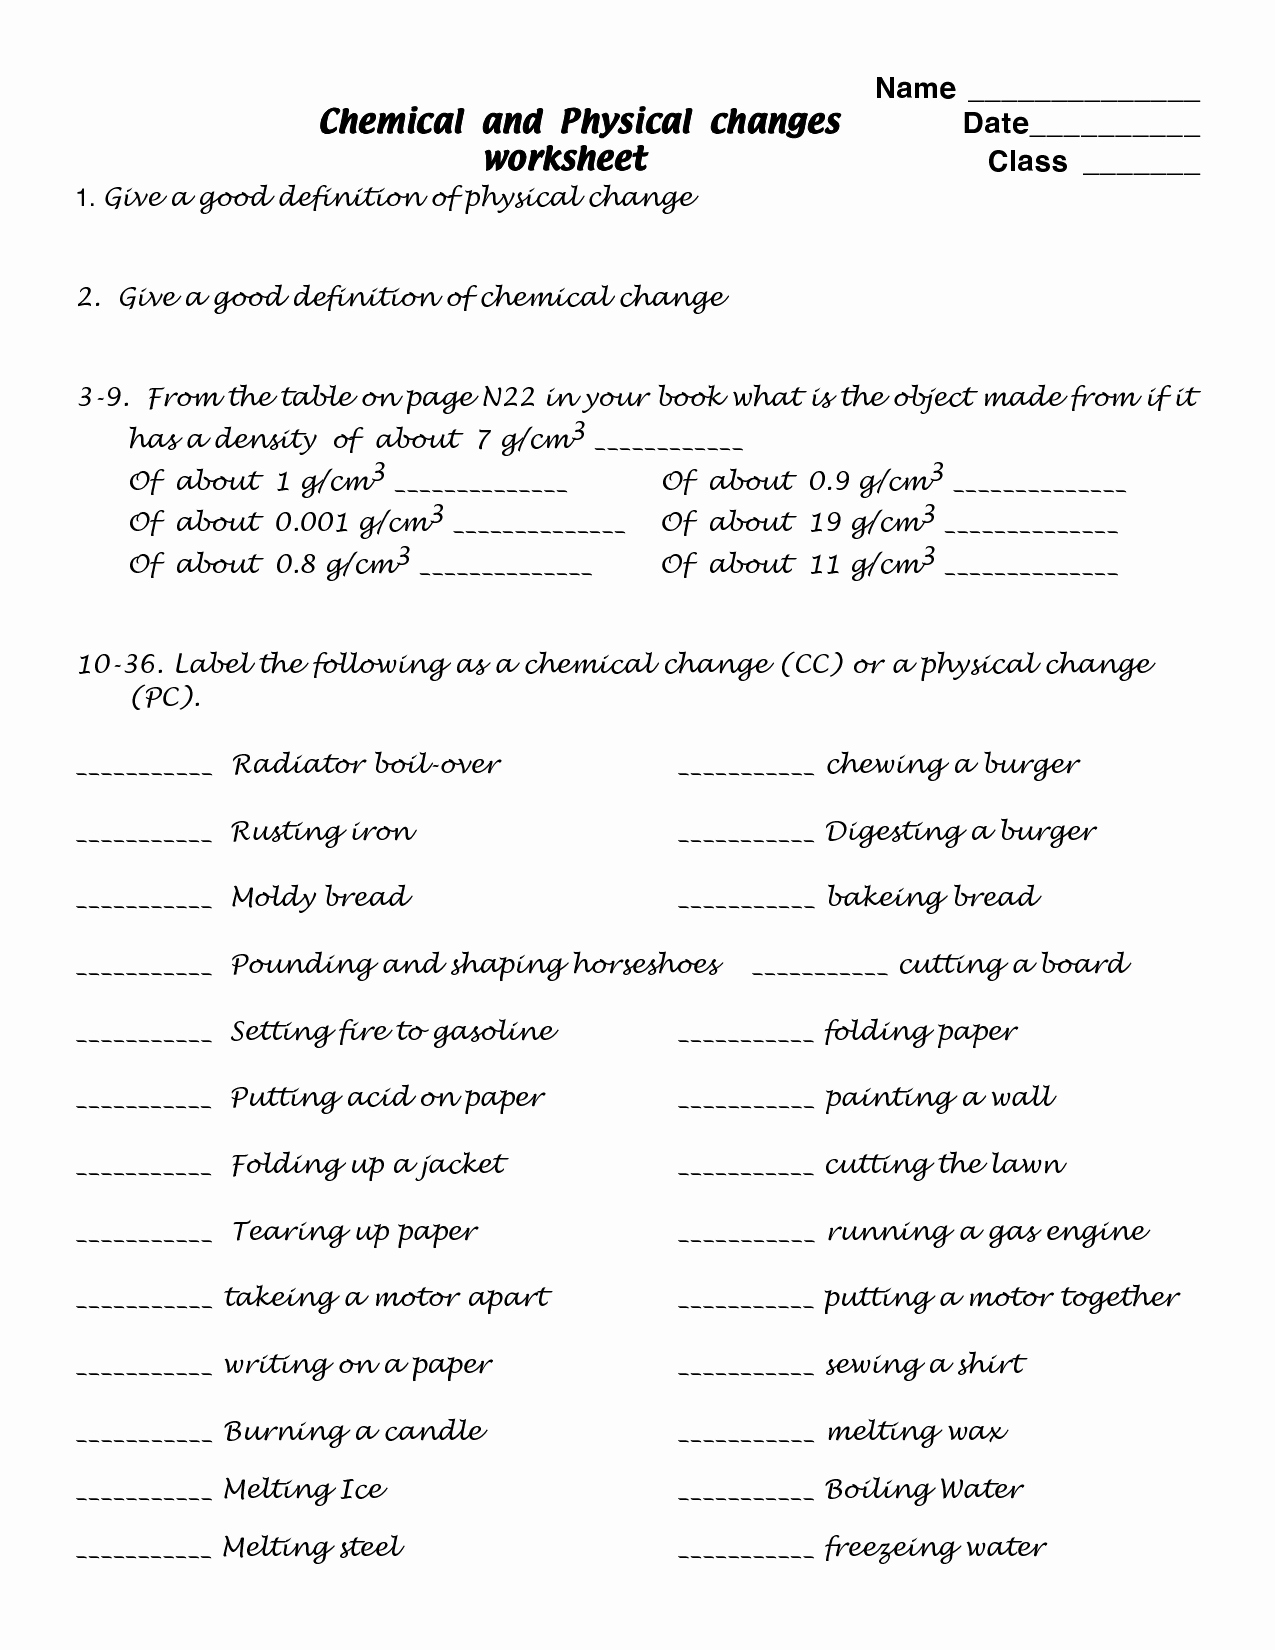 Physical and Chemical Changes Worksheet Best Of 17 Best Of Lifestyle Change Worksheet Phase